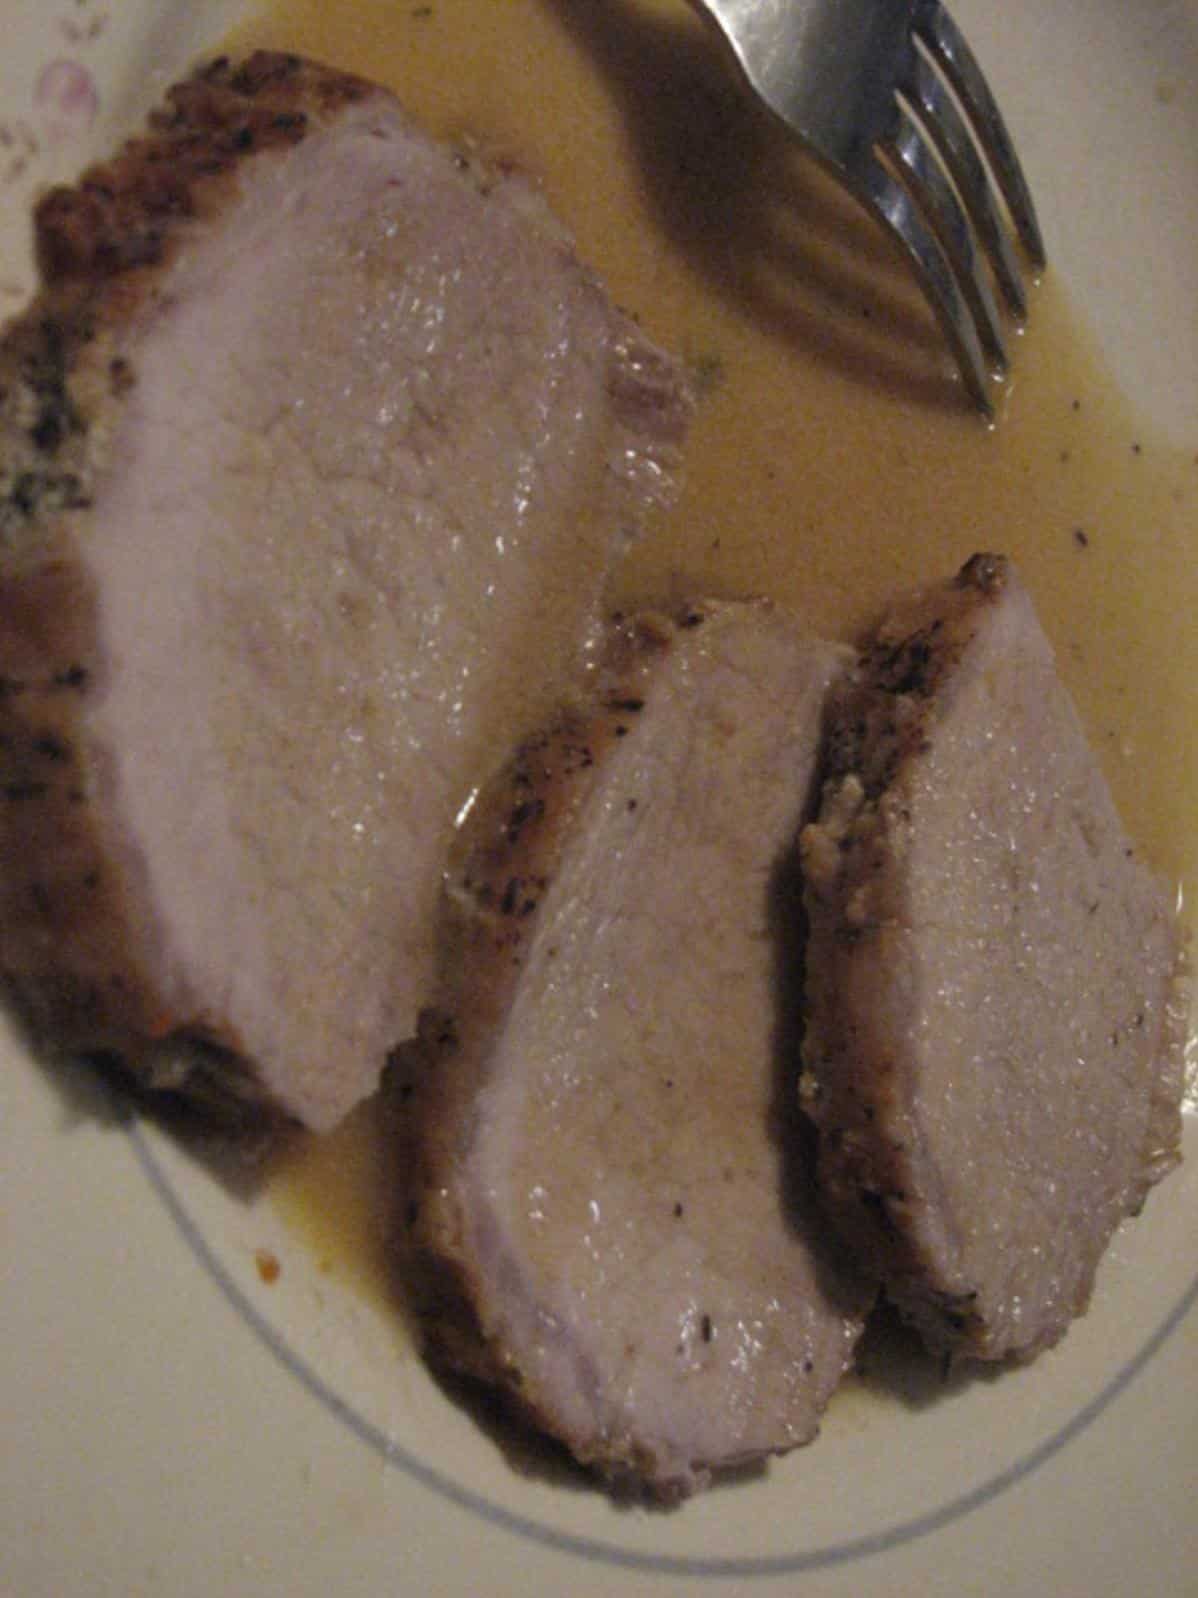  A juicy and tender pork loin soaking up all the goodness of whole milk